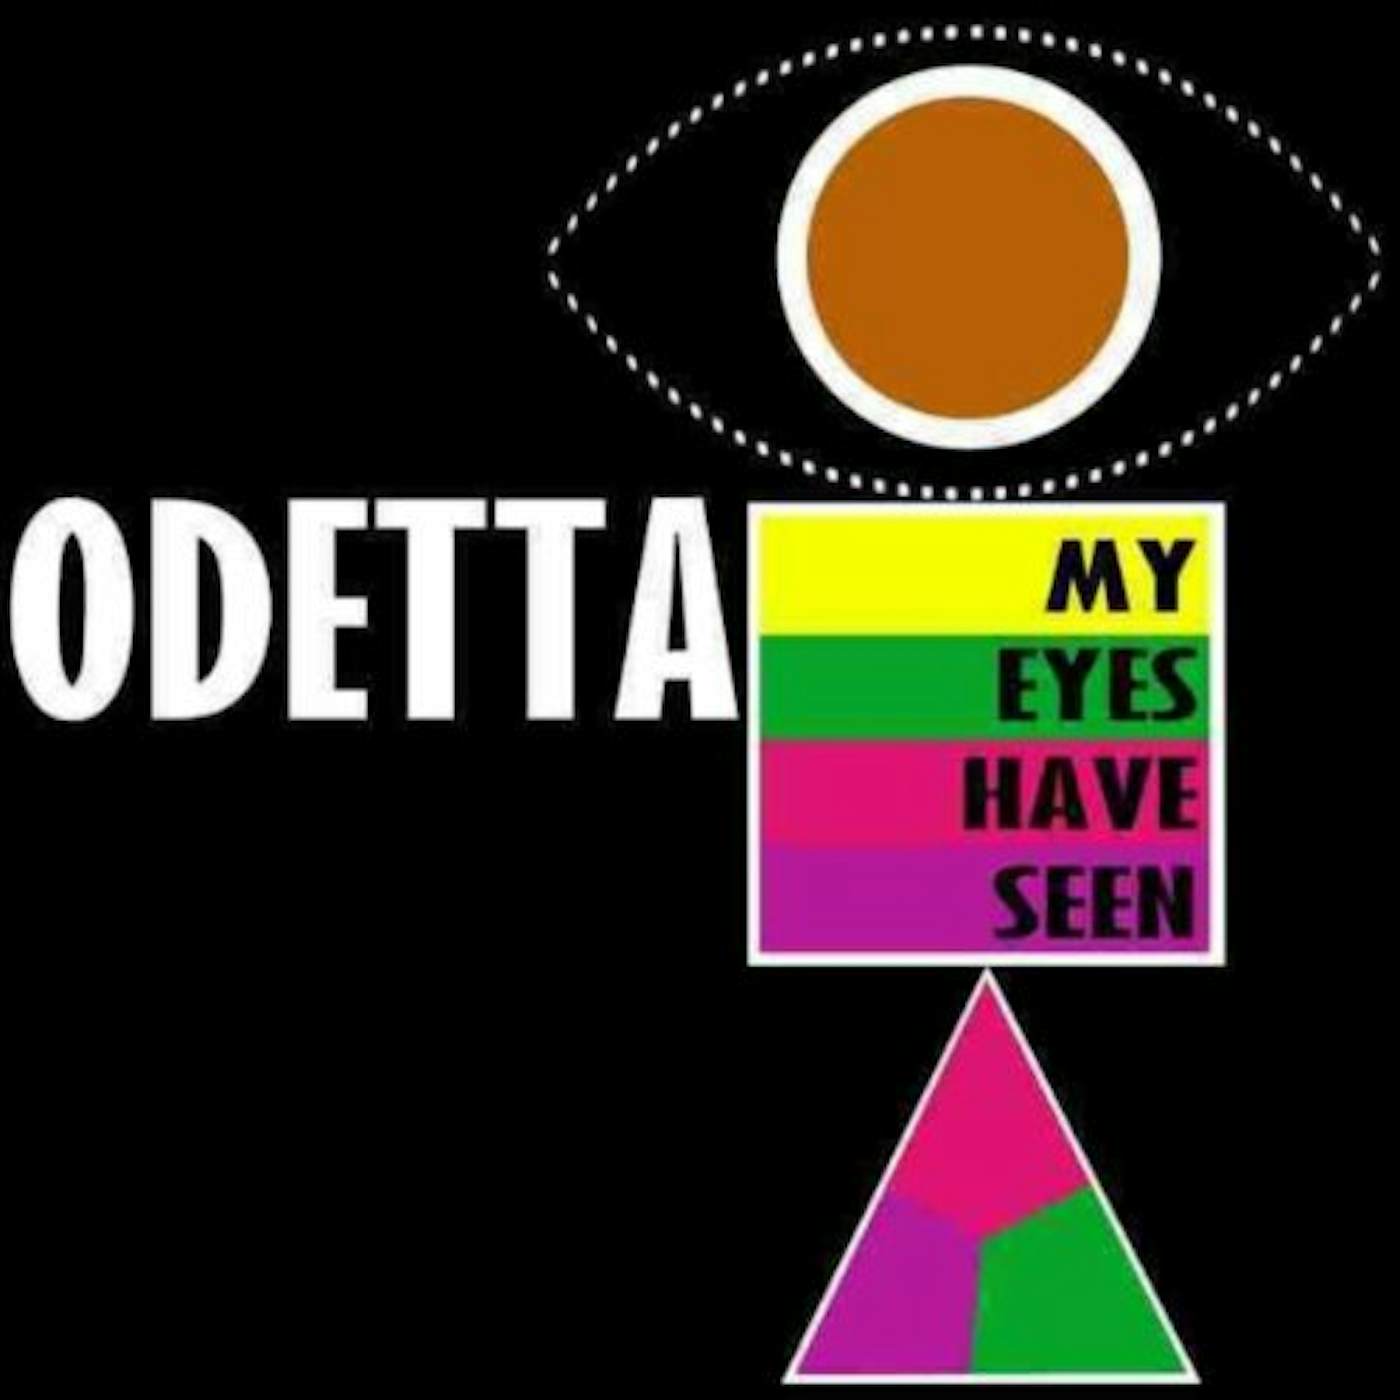 Odetta MY EYES HAVE SEEN / TIN ANGEL / AT THE GATES OF CD